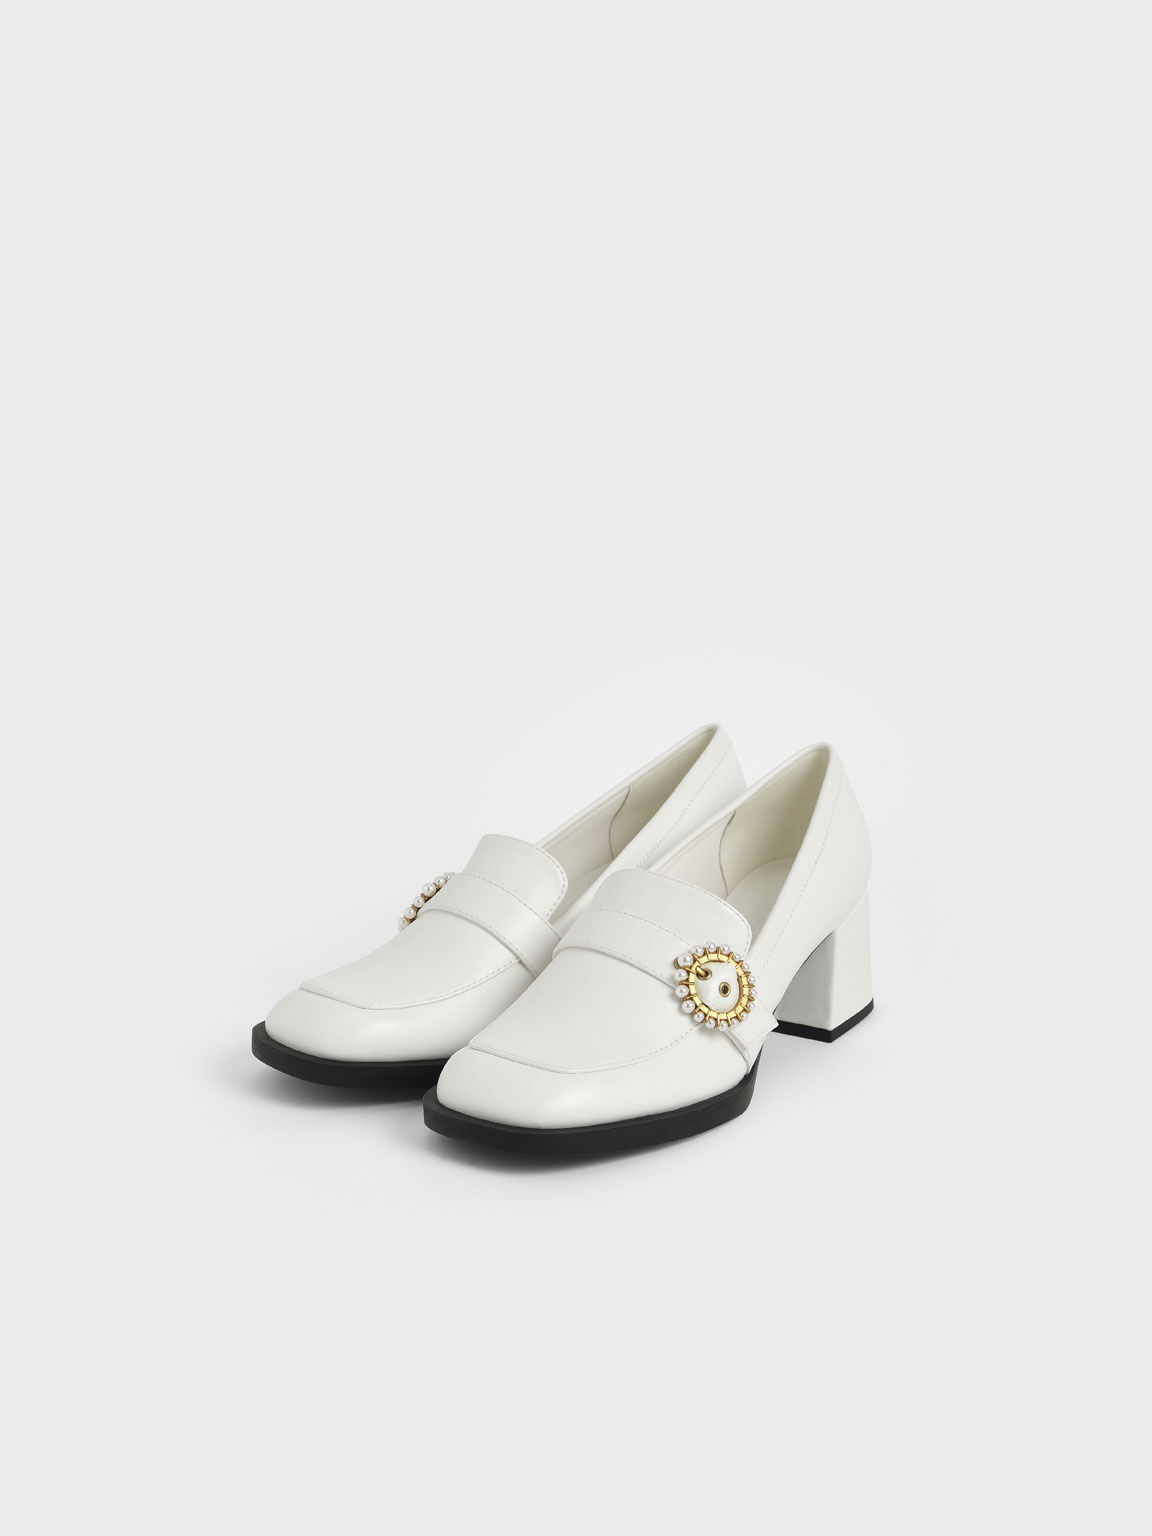 Beaded Accent Loafer Pumps, White, hi-res